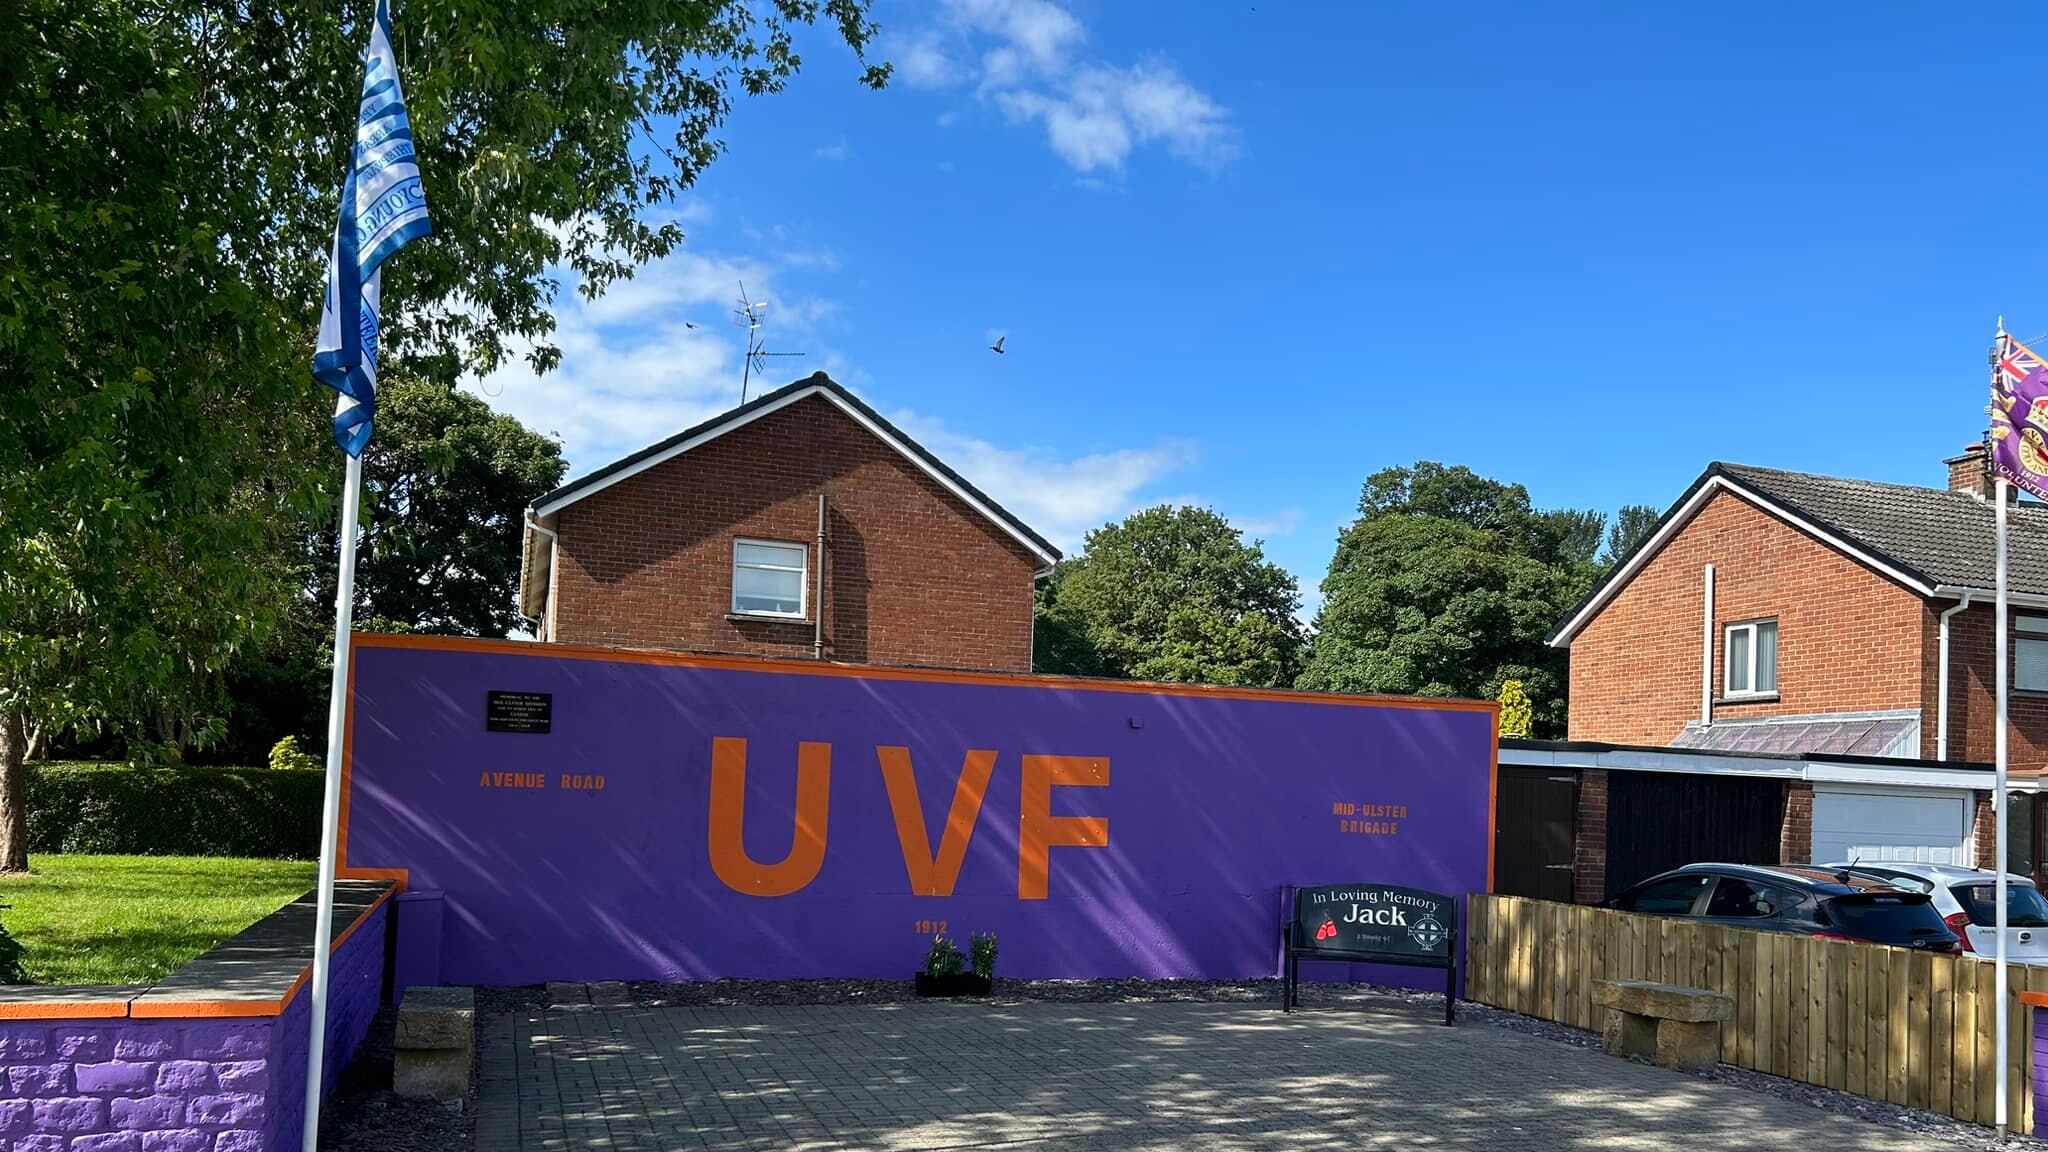 A new mural dedicated to the UVF has been painted outside the gates to Lurgan Park.